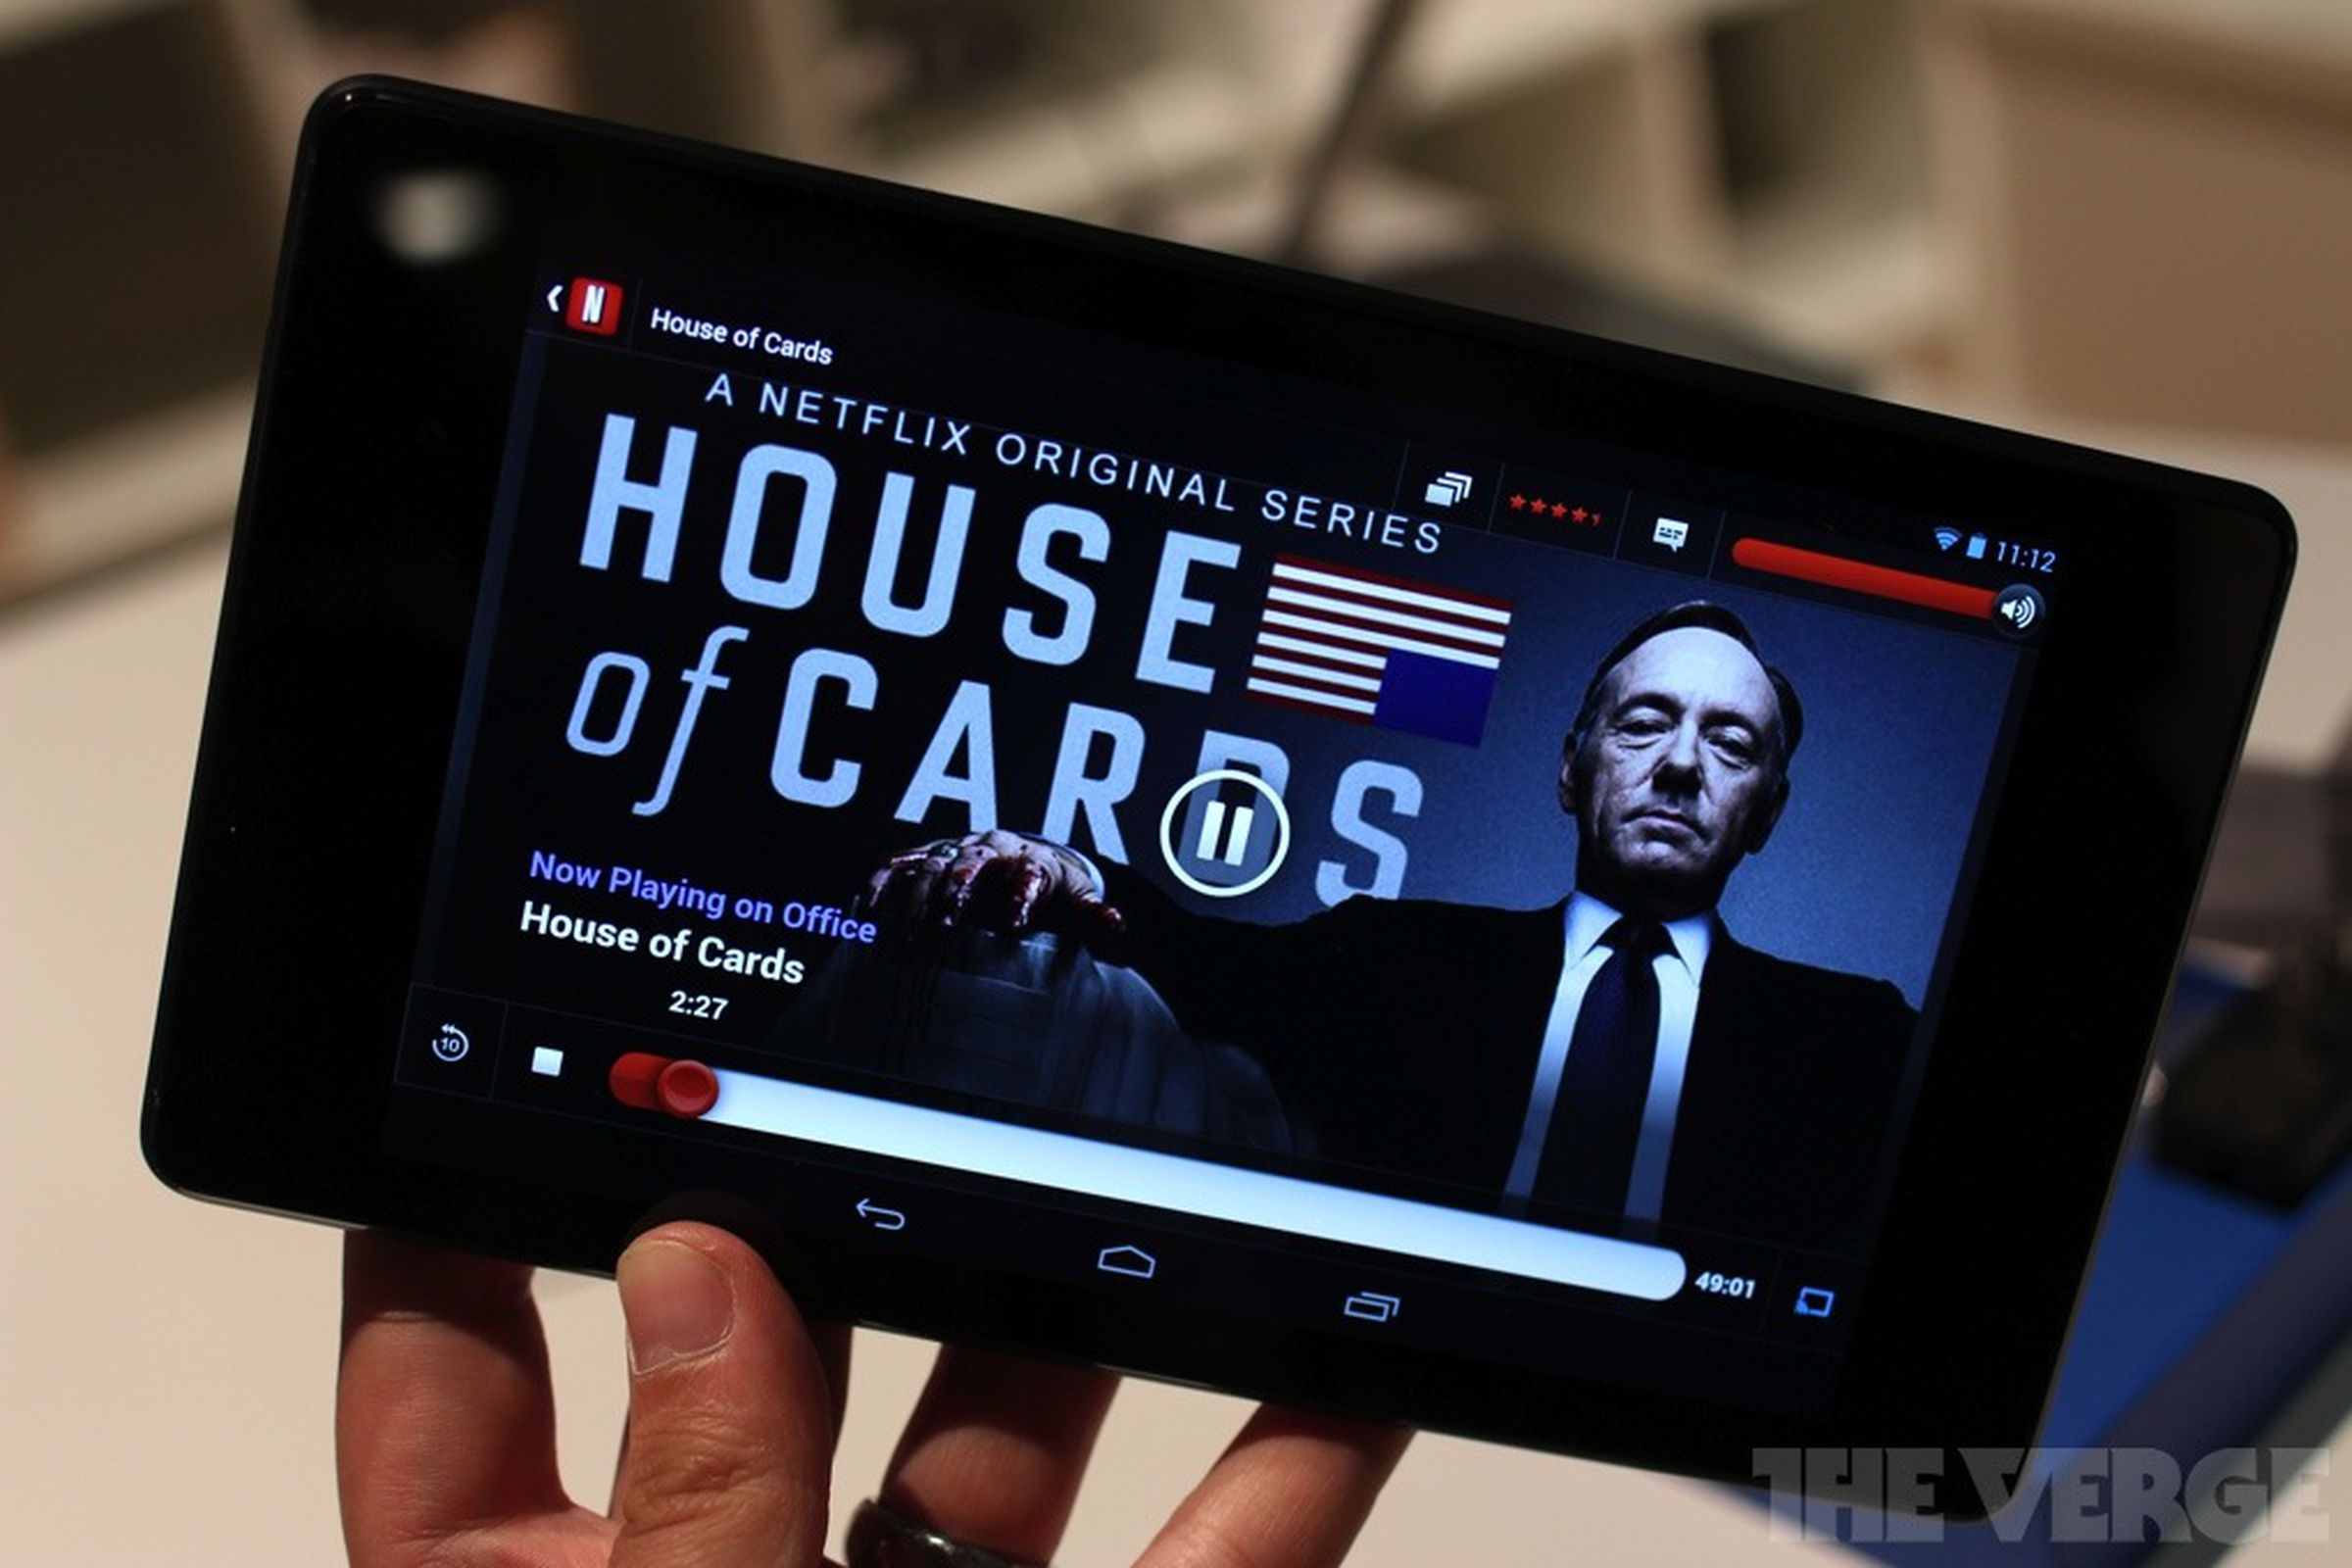 Netflix House of Cards tablet tv second screen stock 1020 1-2